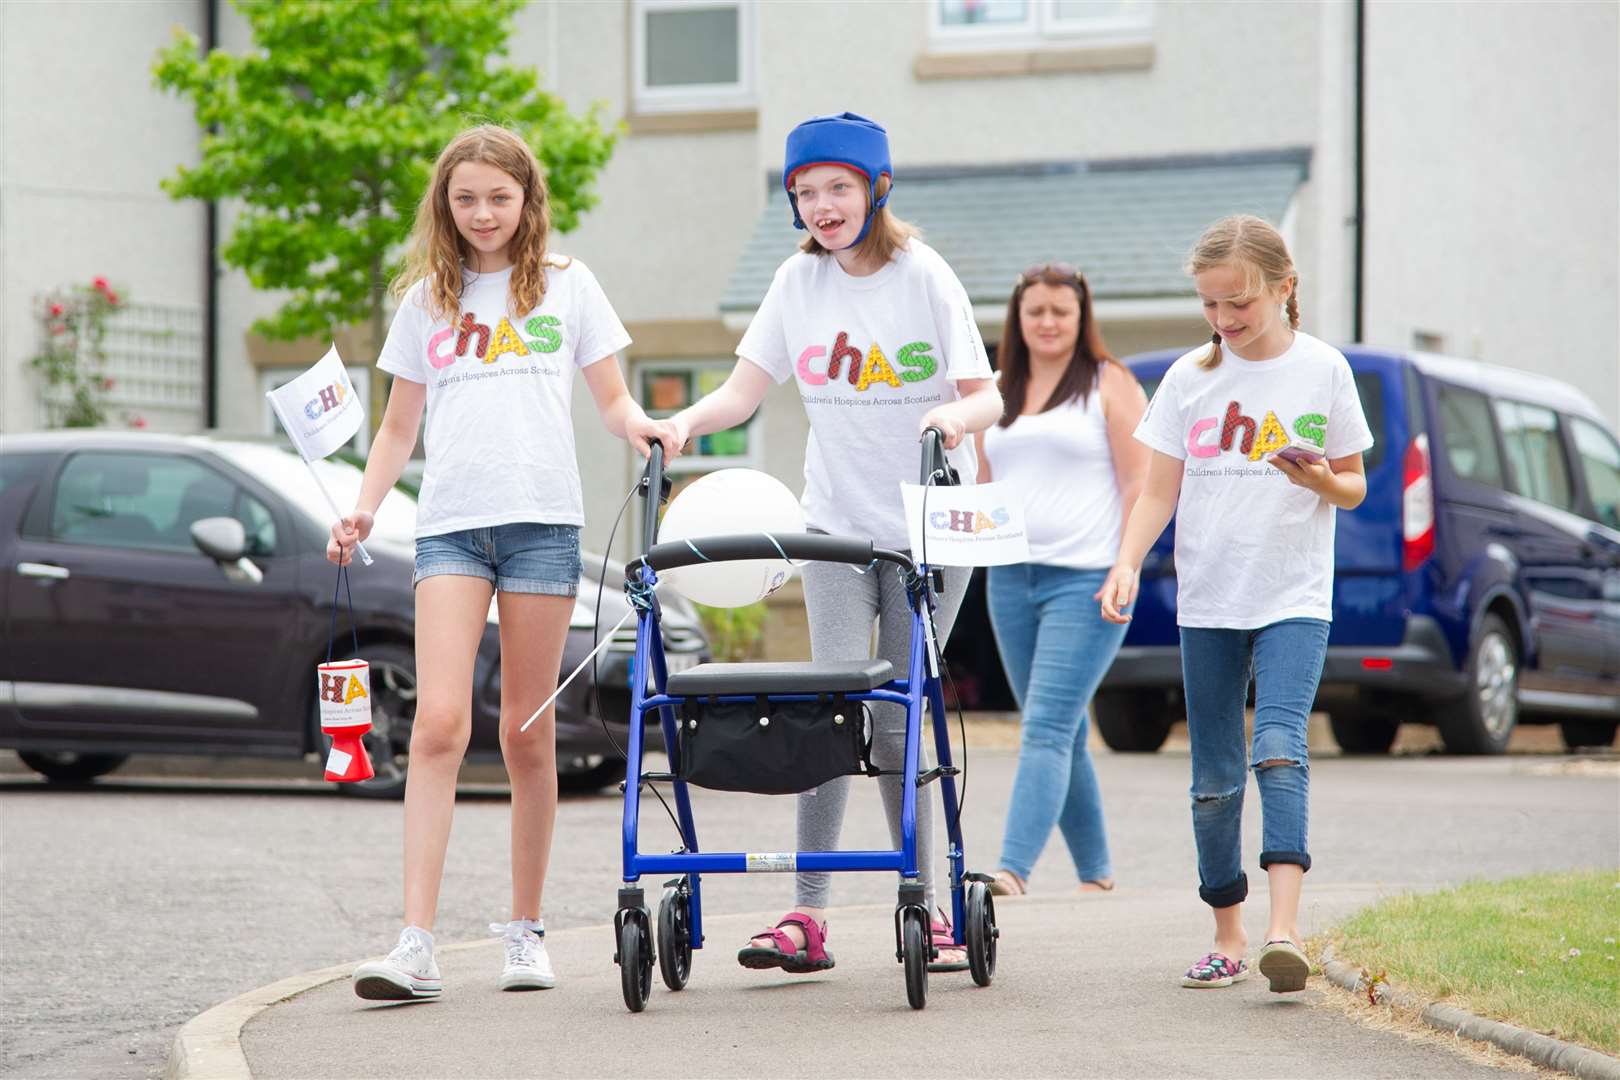 Ella Langdale (15) has Lennox gastaut syndrome and is walking 10km over 100 laps around her street in Elgin to raise money for the team at CHAS who have been helping look after her during lockdown...Picture: Daniel Forsyth..